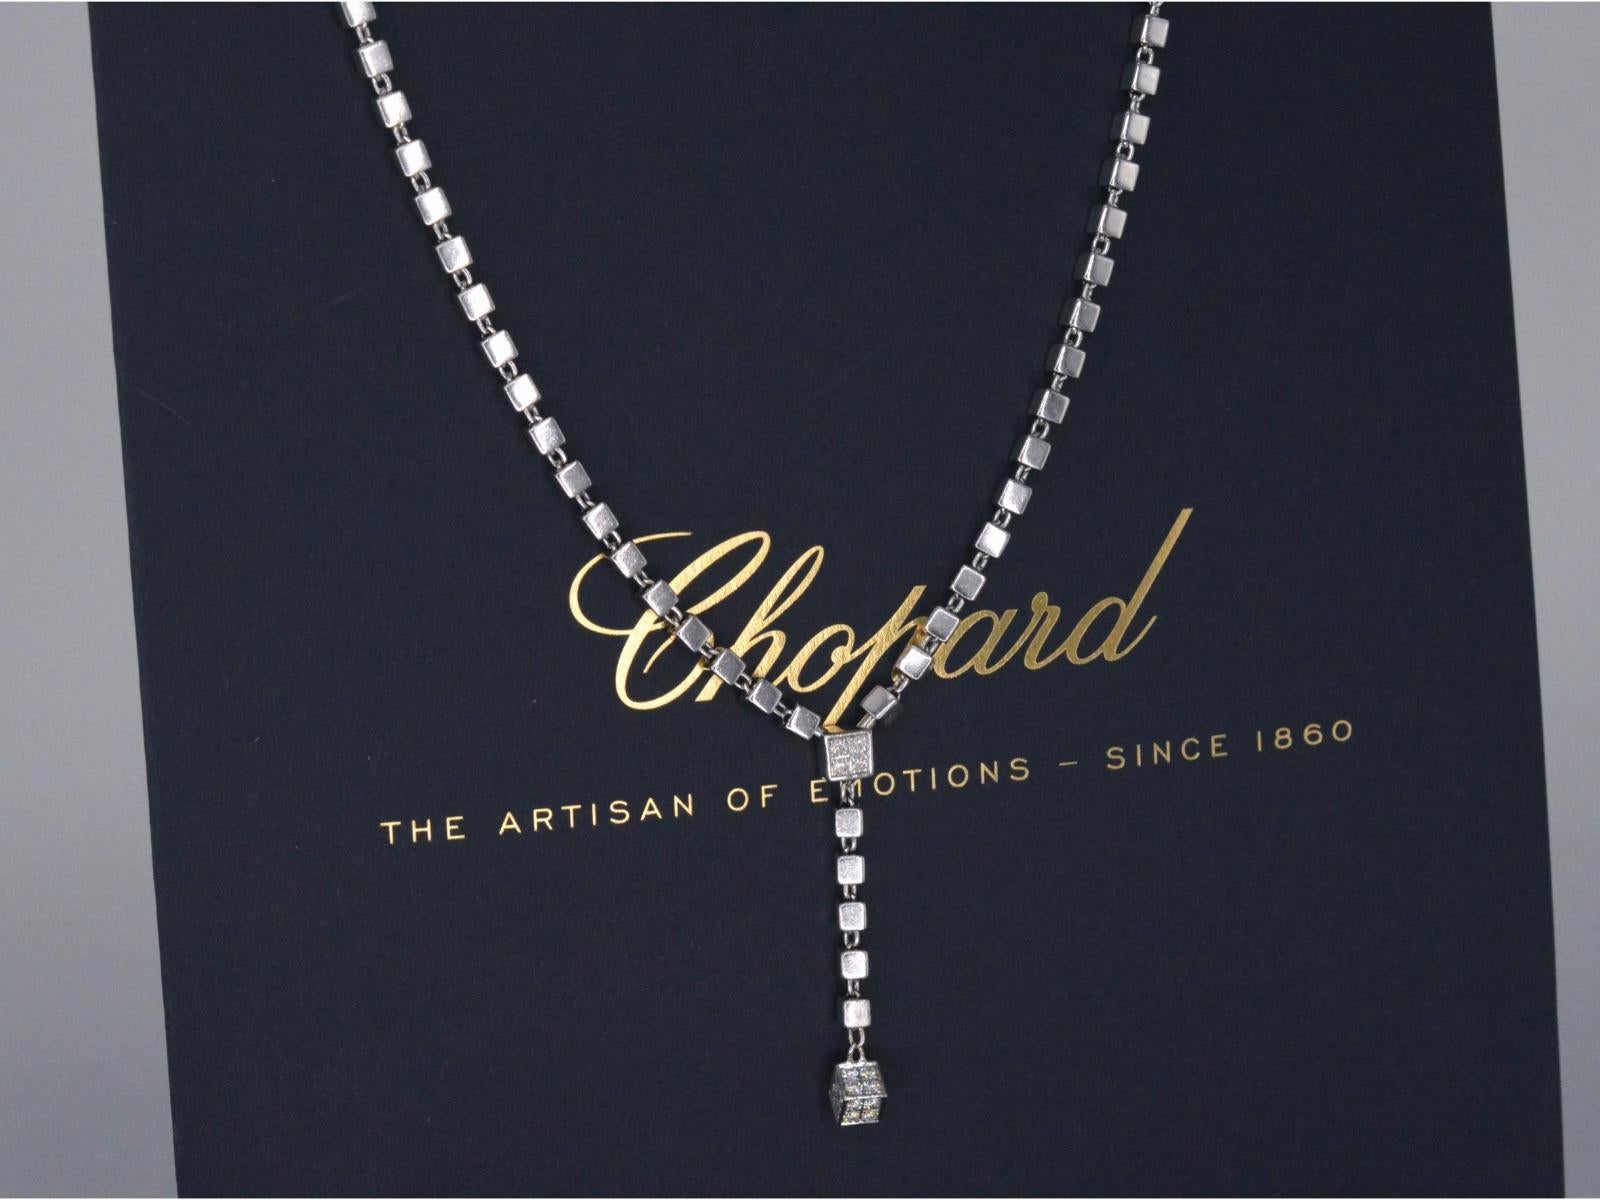 An exquisite Chopard necklace adorned with an astounding 200 brilliant-cut diamonds, totaling 2.00 carats. These diamonds, meticulously crafted with exceptional precision, display the highest quality with color grades of D-E and VVS clarity. Their